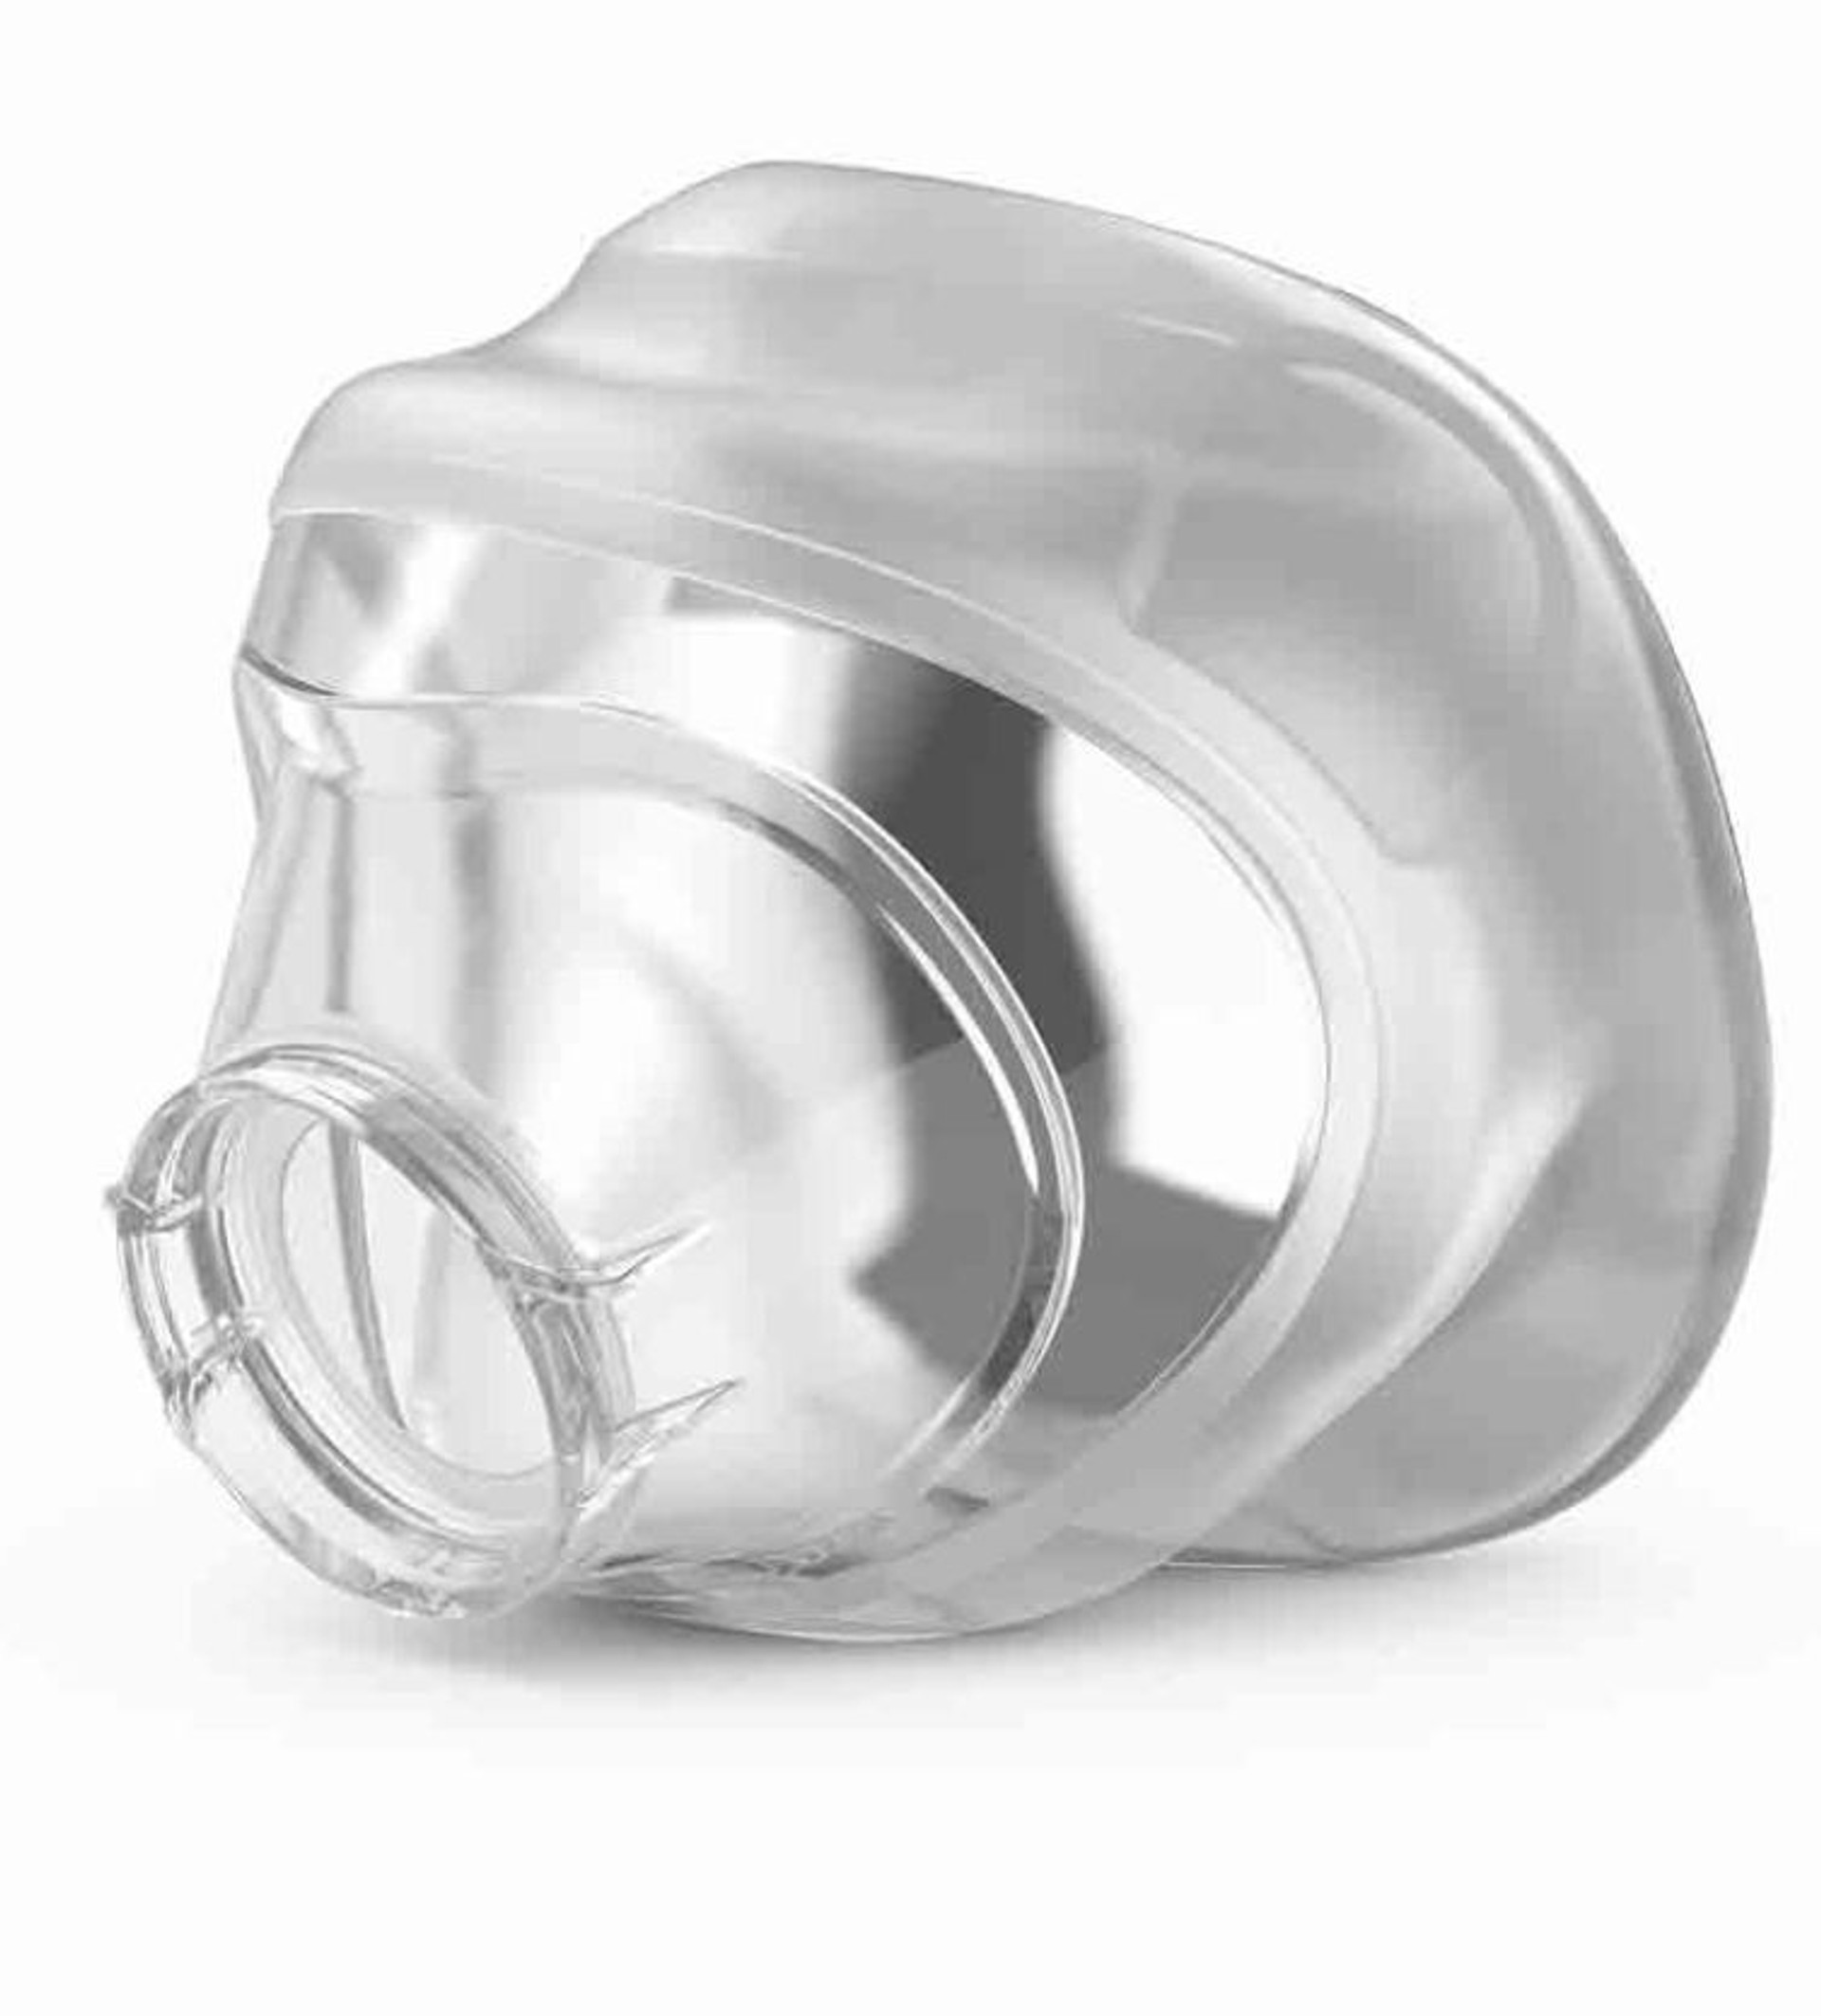 Resmed Cpap Mask Parts Airtouch N20 Cushion Online At Kinmedca 2172